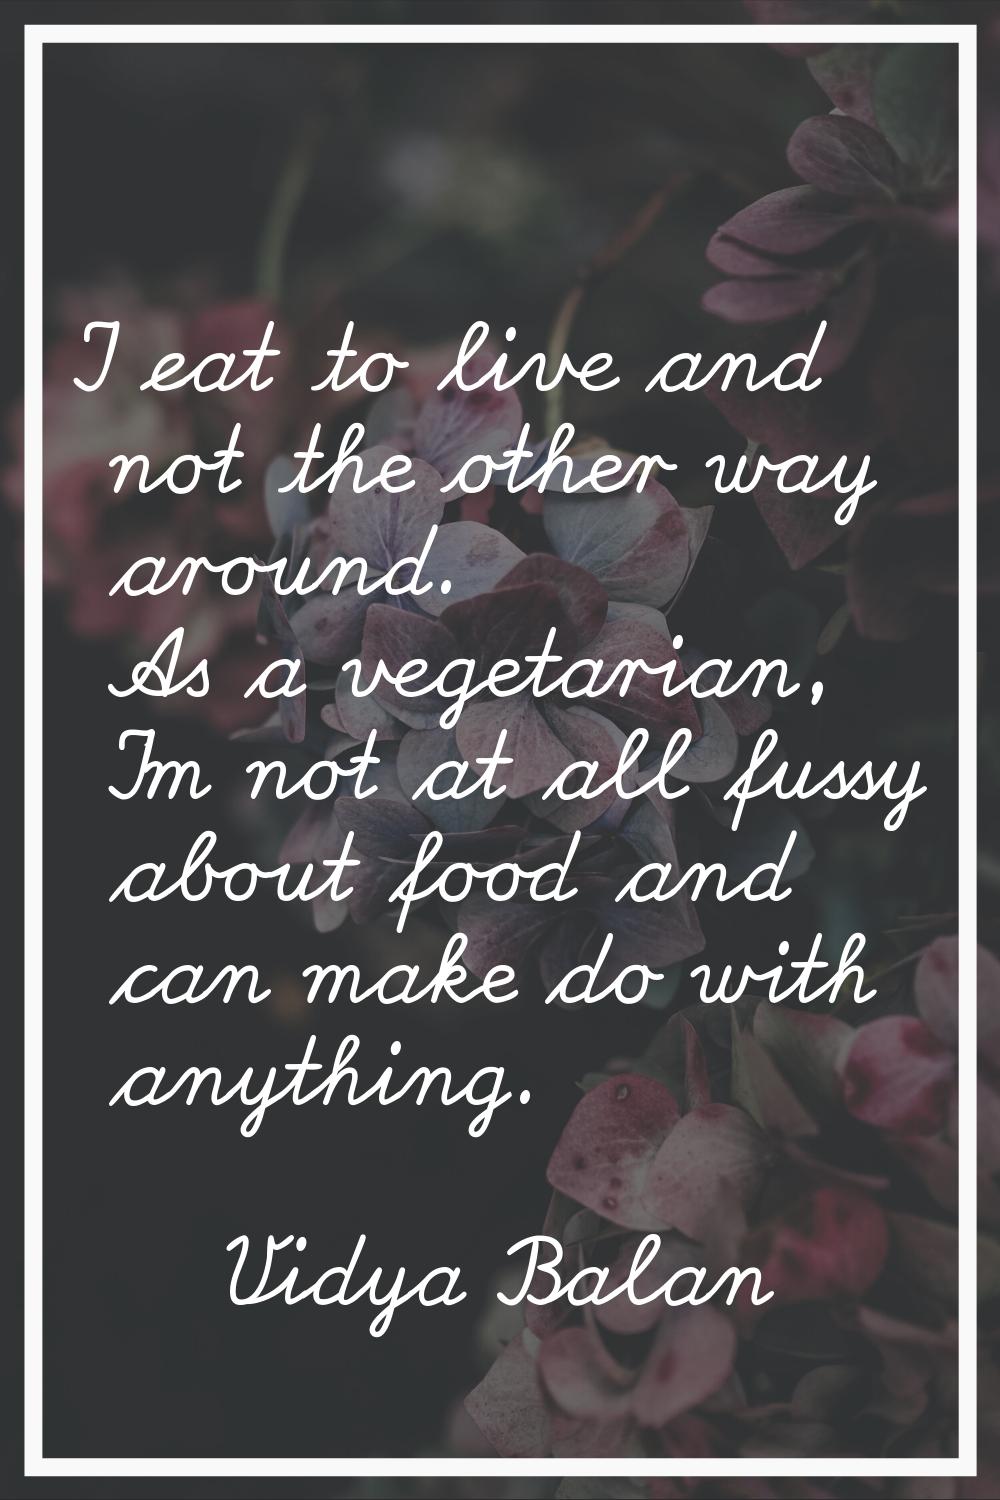 I eat to live and not the other way around. As a vegetarian, I'm not at all fussy about food and ca